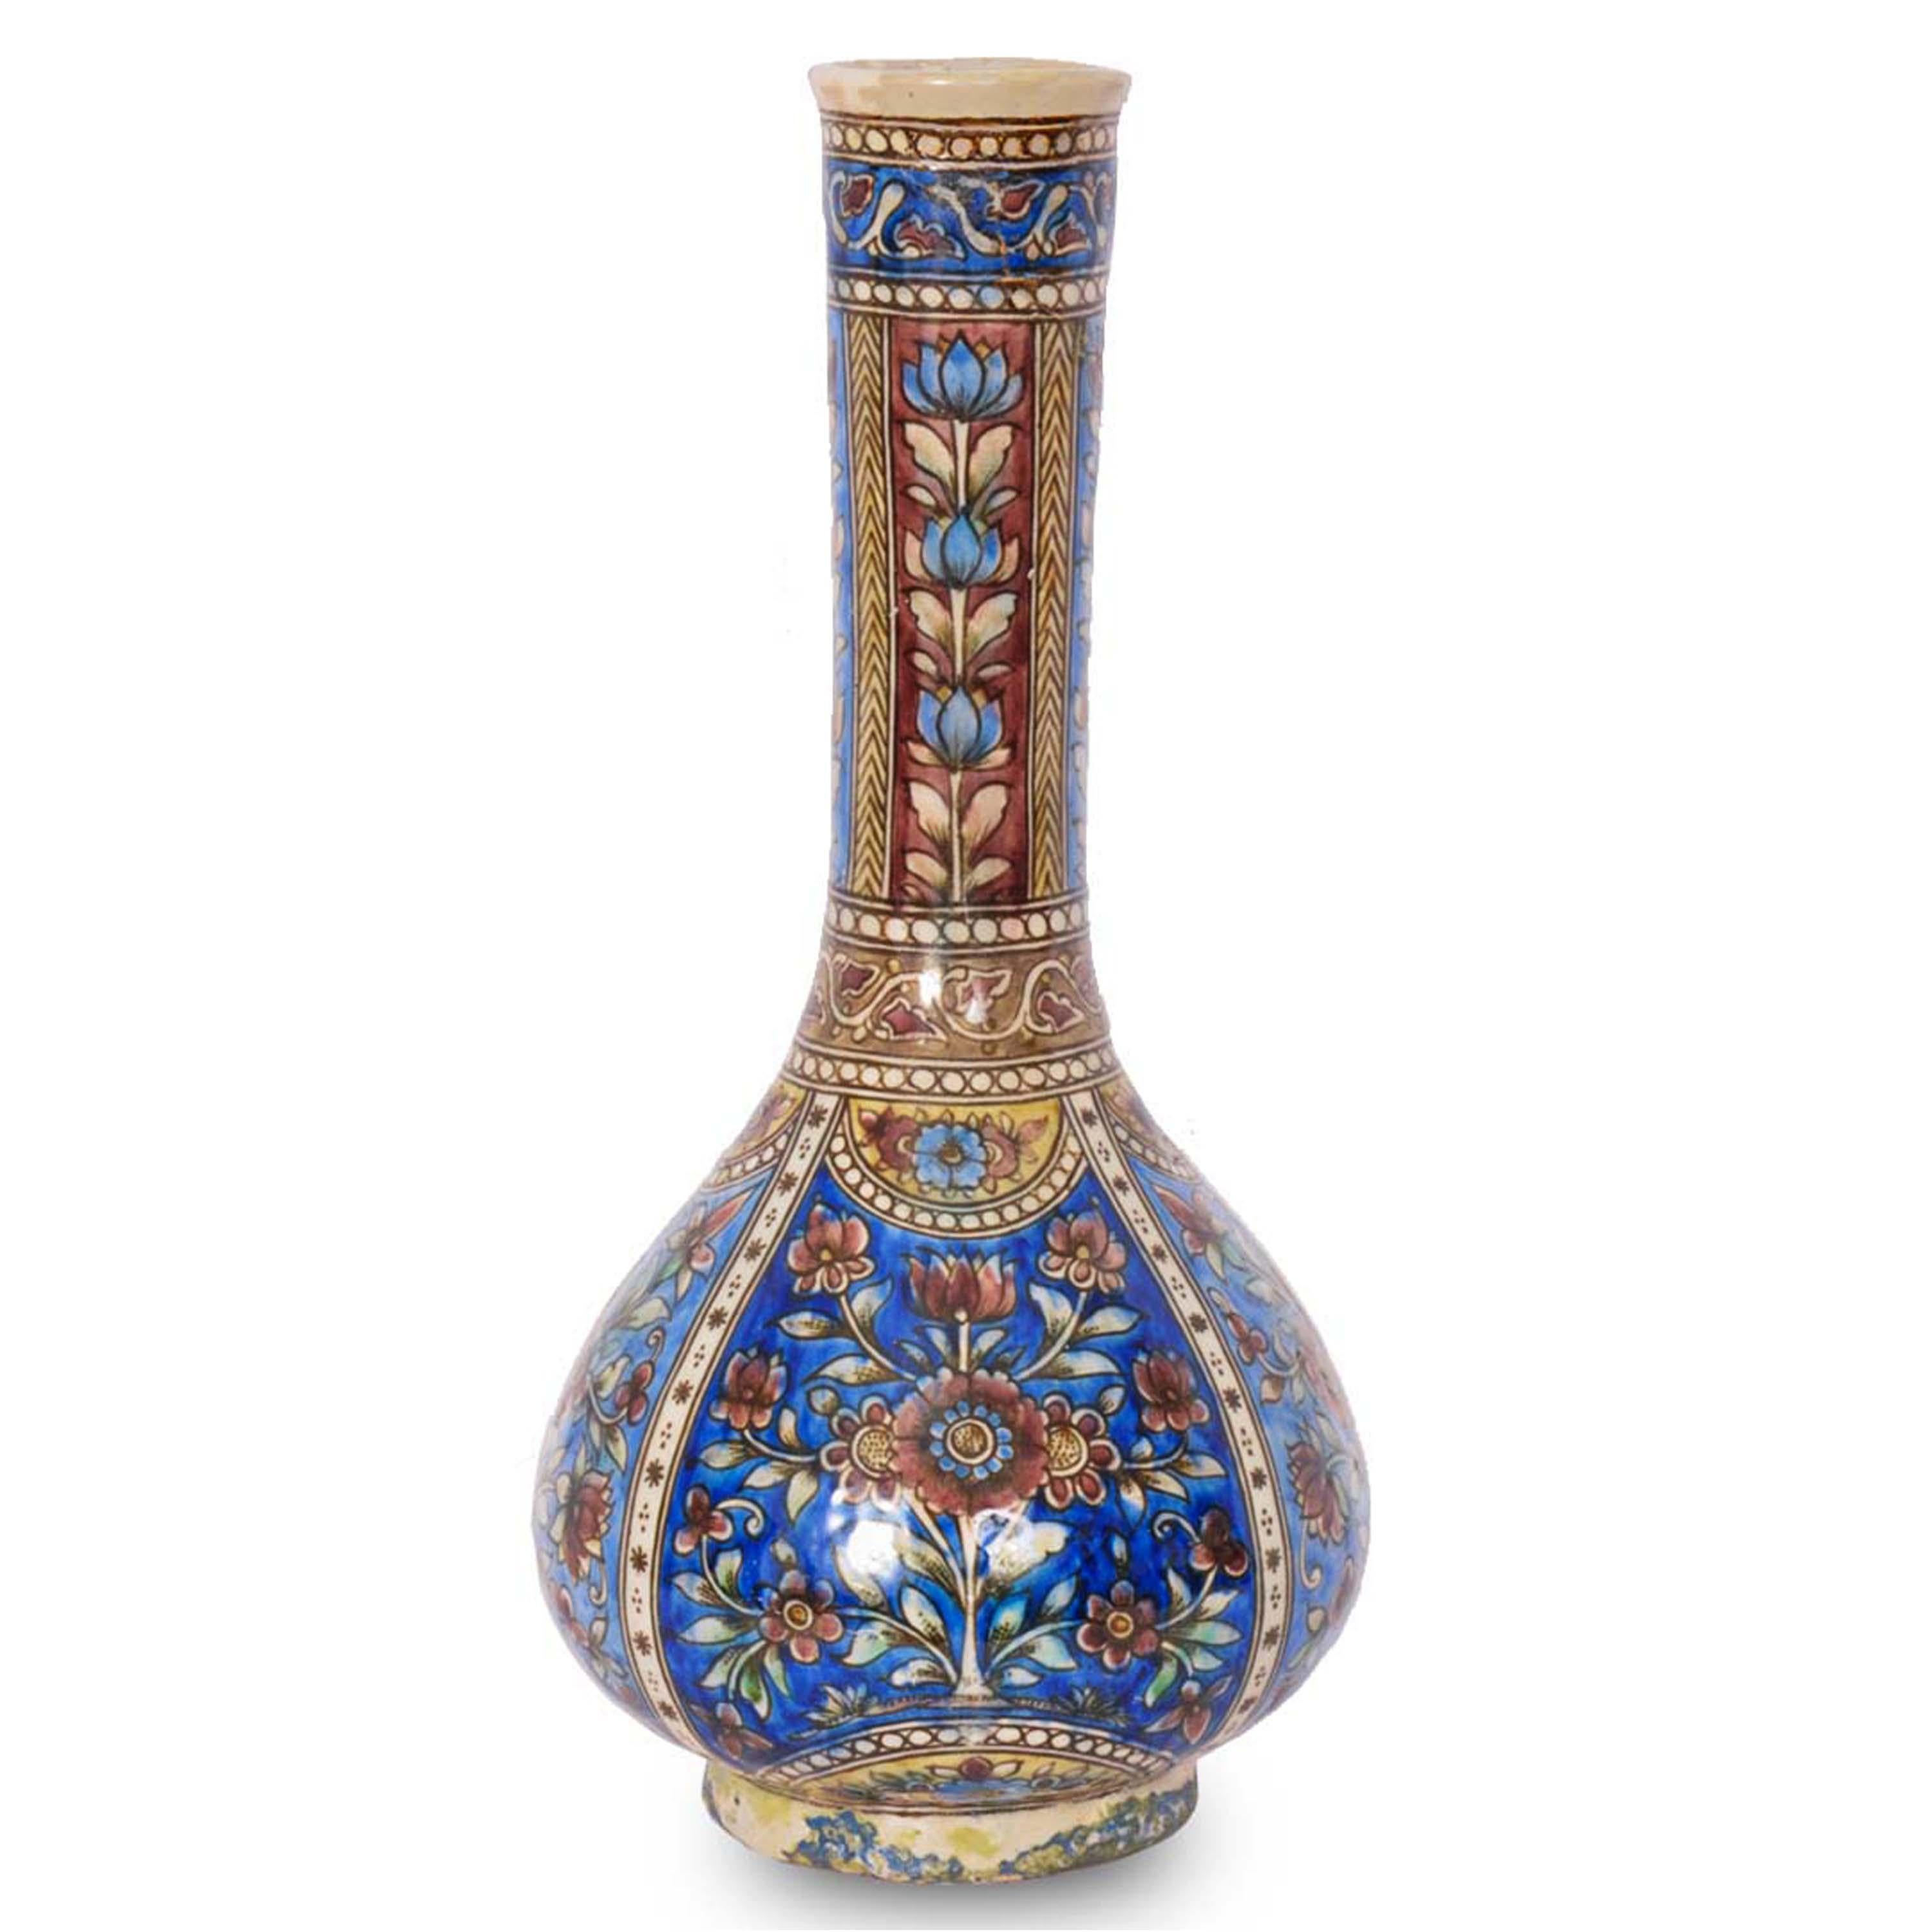 A good pair of antique early 19th century Ottoman Islamic Iznik/Kutahya pottery bottle vases, Turkey, circa 1820.
The vases of bottle form with a flared mouth and tapering neck, having globular shaped bases and raised on a circular flared foot. Each